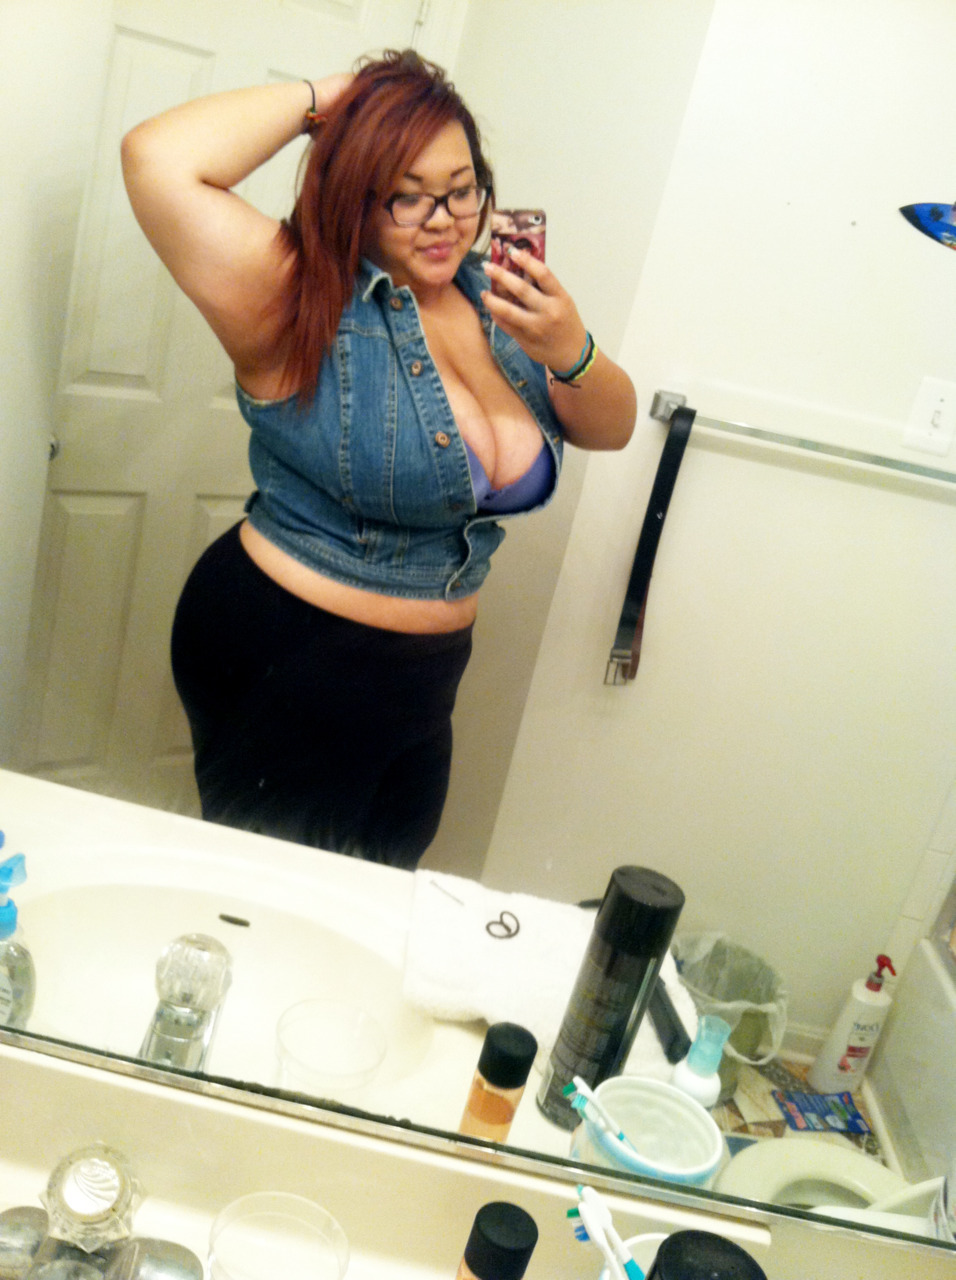 Thisisroy – Ohreinababyy – What A Ginger – Damn Gingers Wit Their Cute Asian Faces Impeccable Curves Mesmerizing Eyes An…6